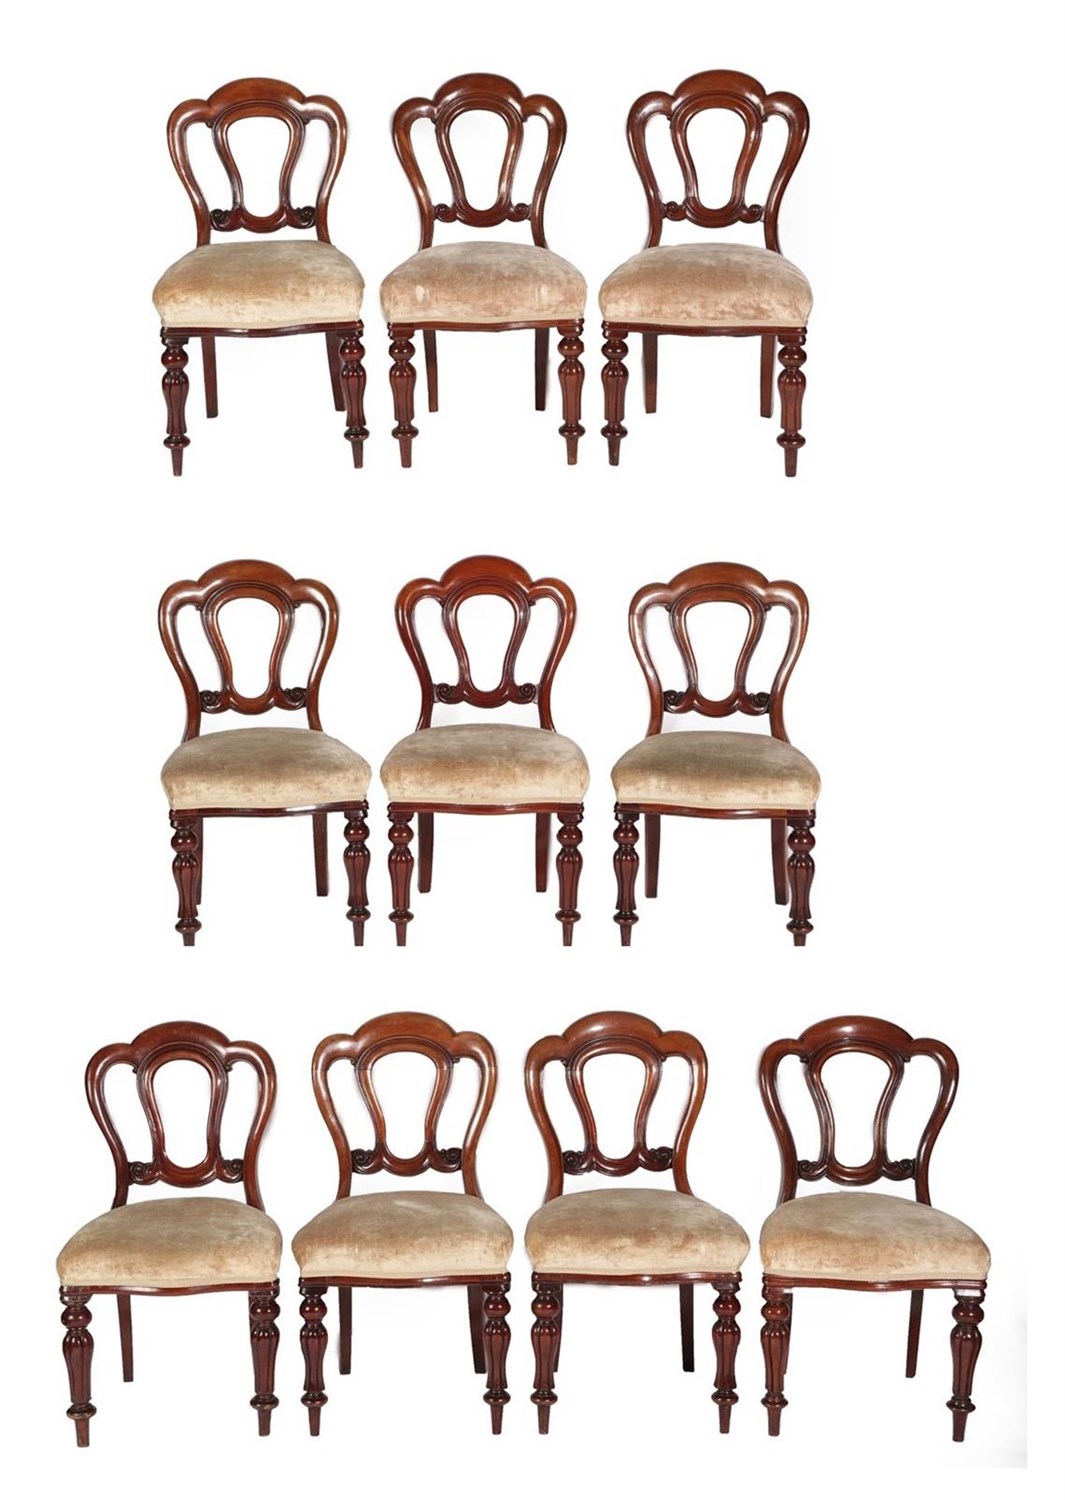 Lot 630 - A Set of Ten Victorian Mahogany Dining Chairs, late 19th century, recovered in beige velvet,...